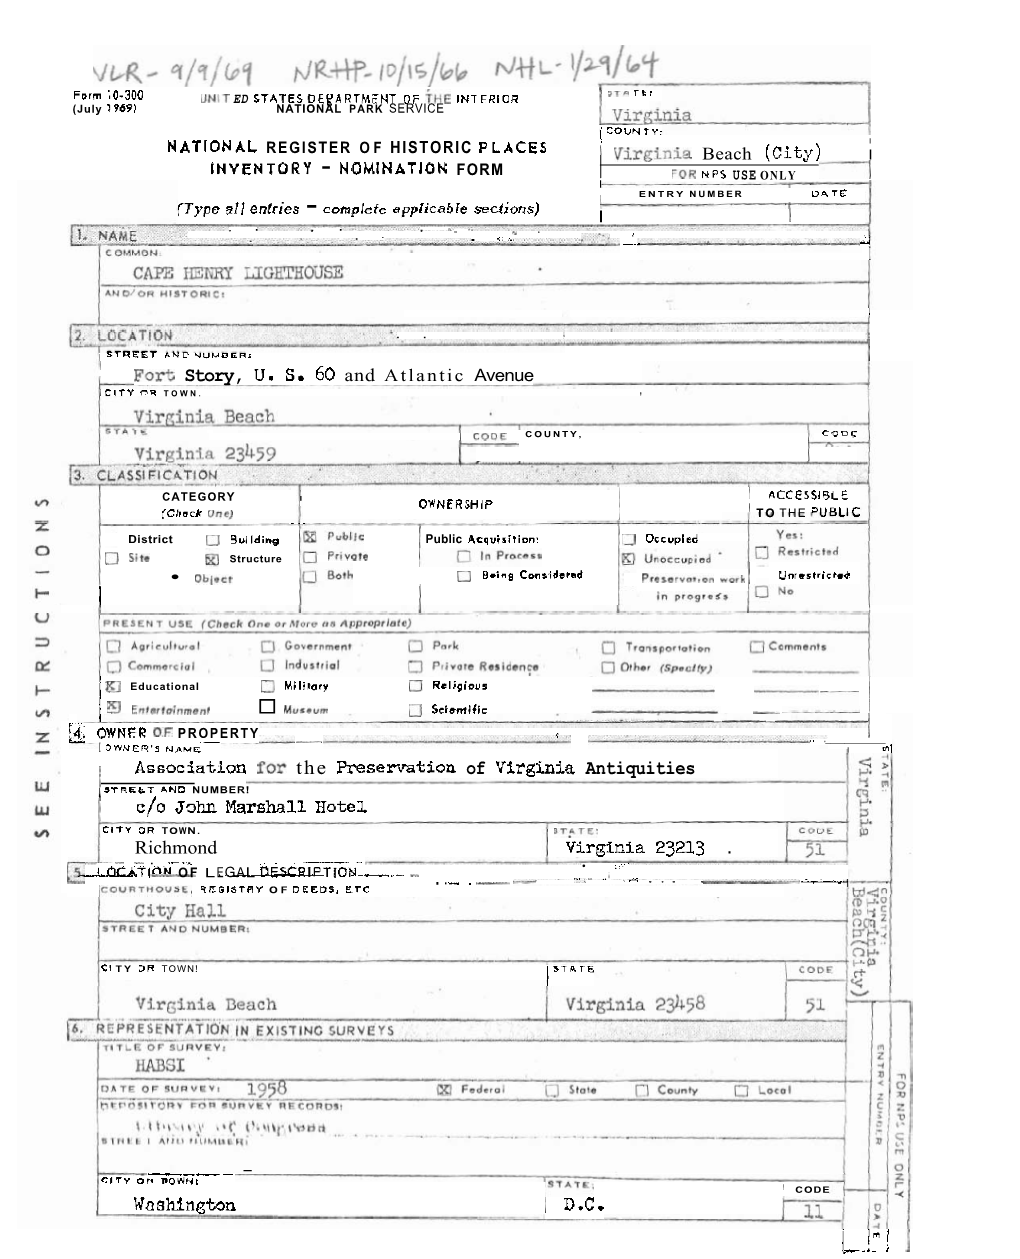 NOMINATION FORM for NPS USE ONLY ENTRVWUMBER DATE (Continuation Sheet) I Fn"Mb.T .I1 ."T,L..J 7 A